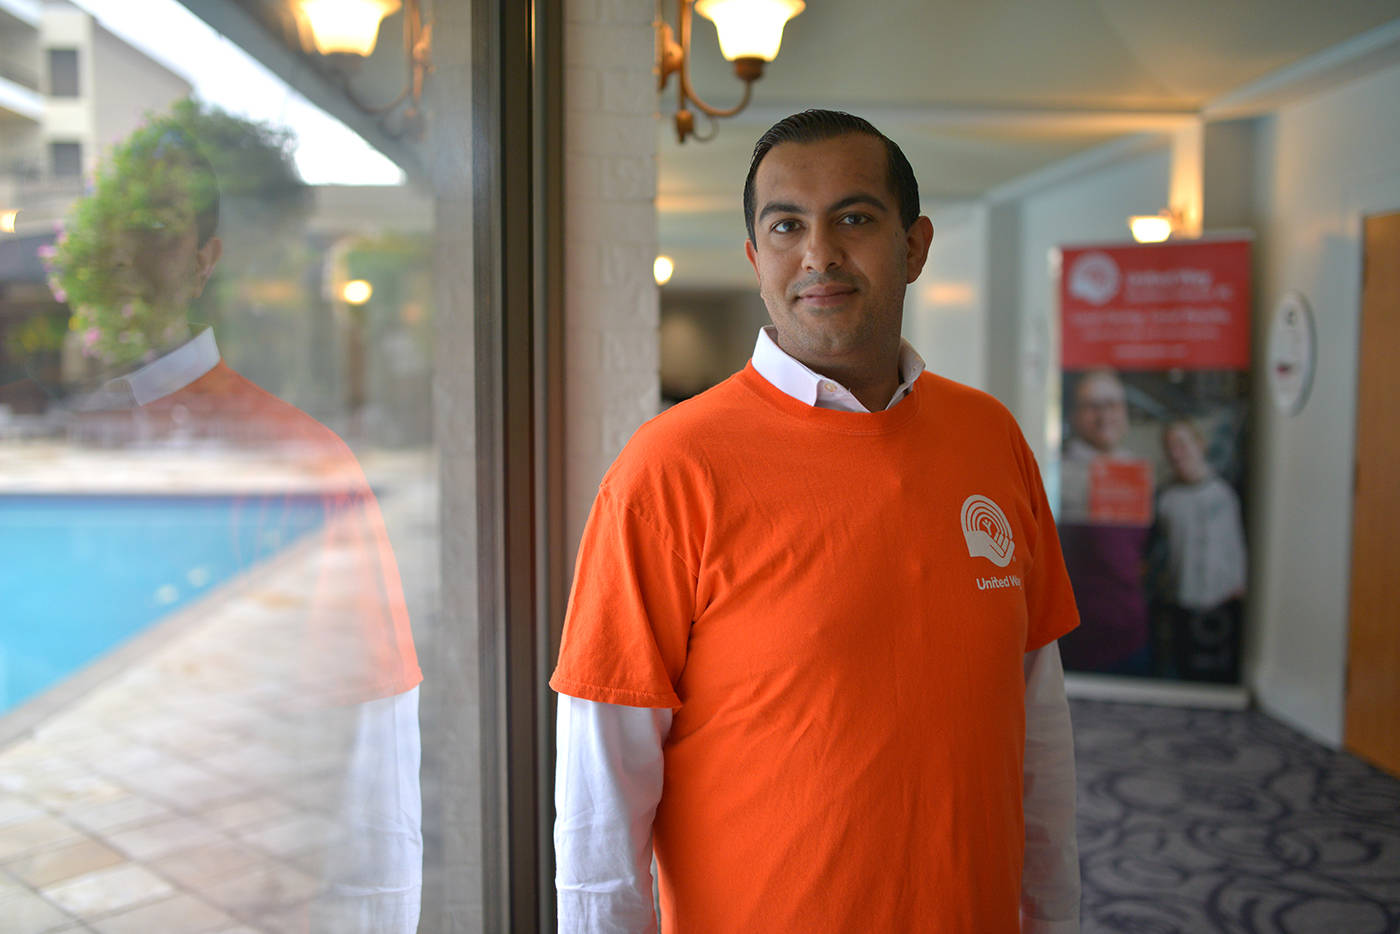 The United Way today (Sept 25) kicked off their 70th campaign, marking a milestone for the organization, as well as a new start. Pictured above is Executive Director, Kahir Lalji, the group’s Executive Director. (Phil McLachlan - Capital News)